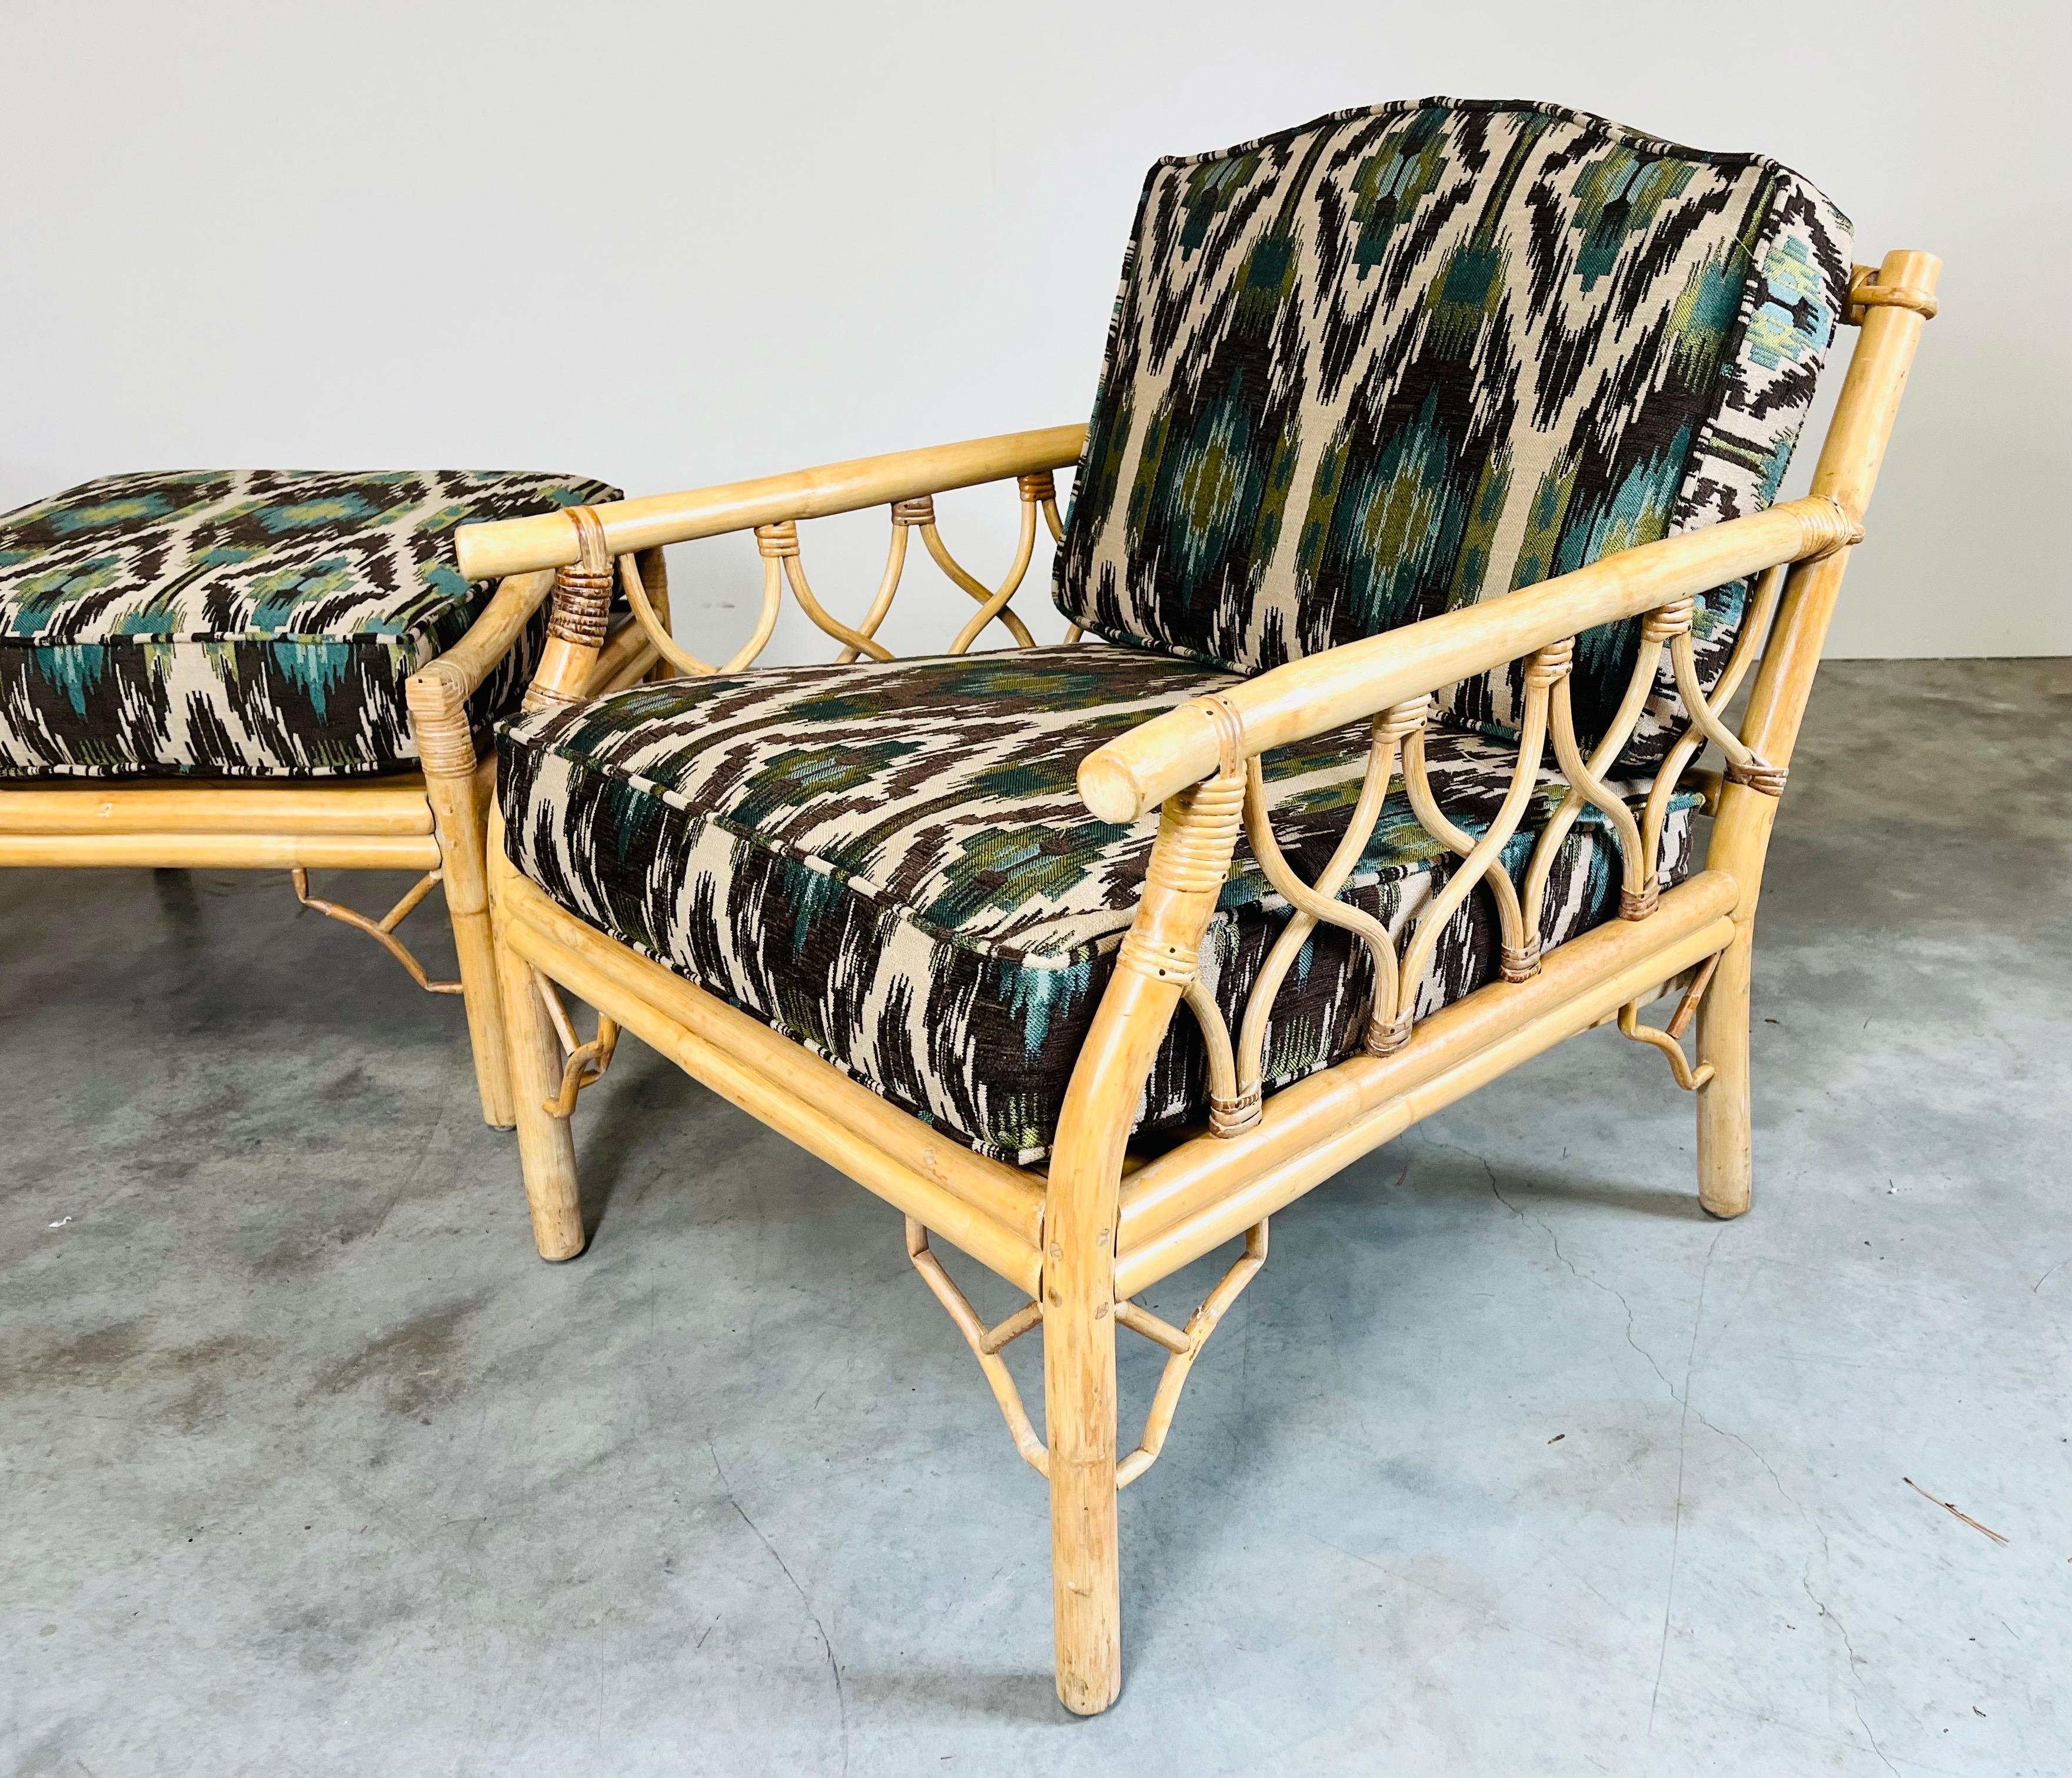 Steel Mid 20th c. Chinese Chippendale Bamboo Rattan Lounge Chairs & Matching Ottoman For Sale